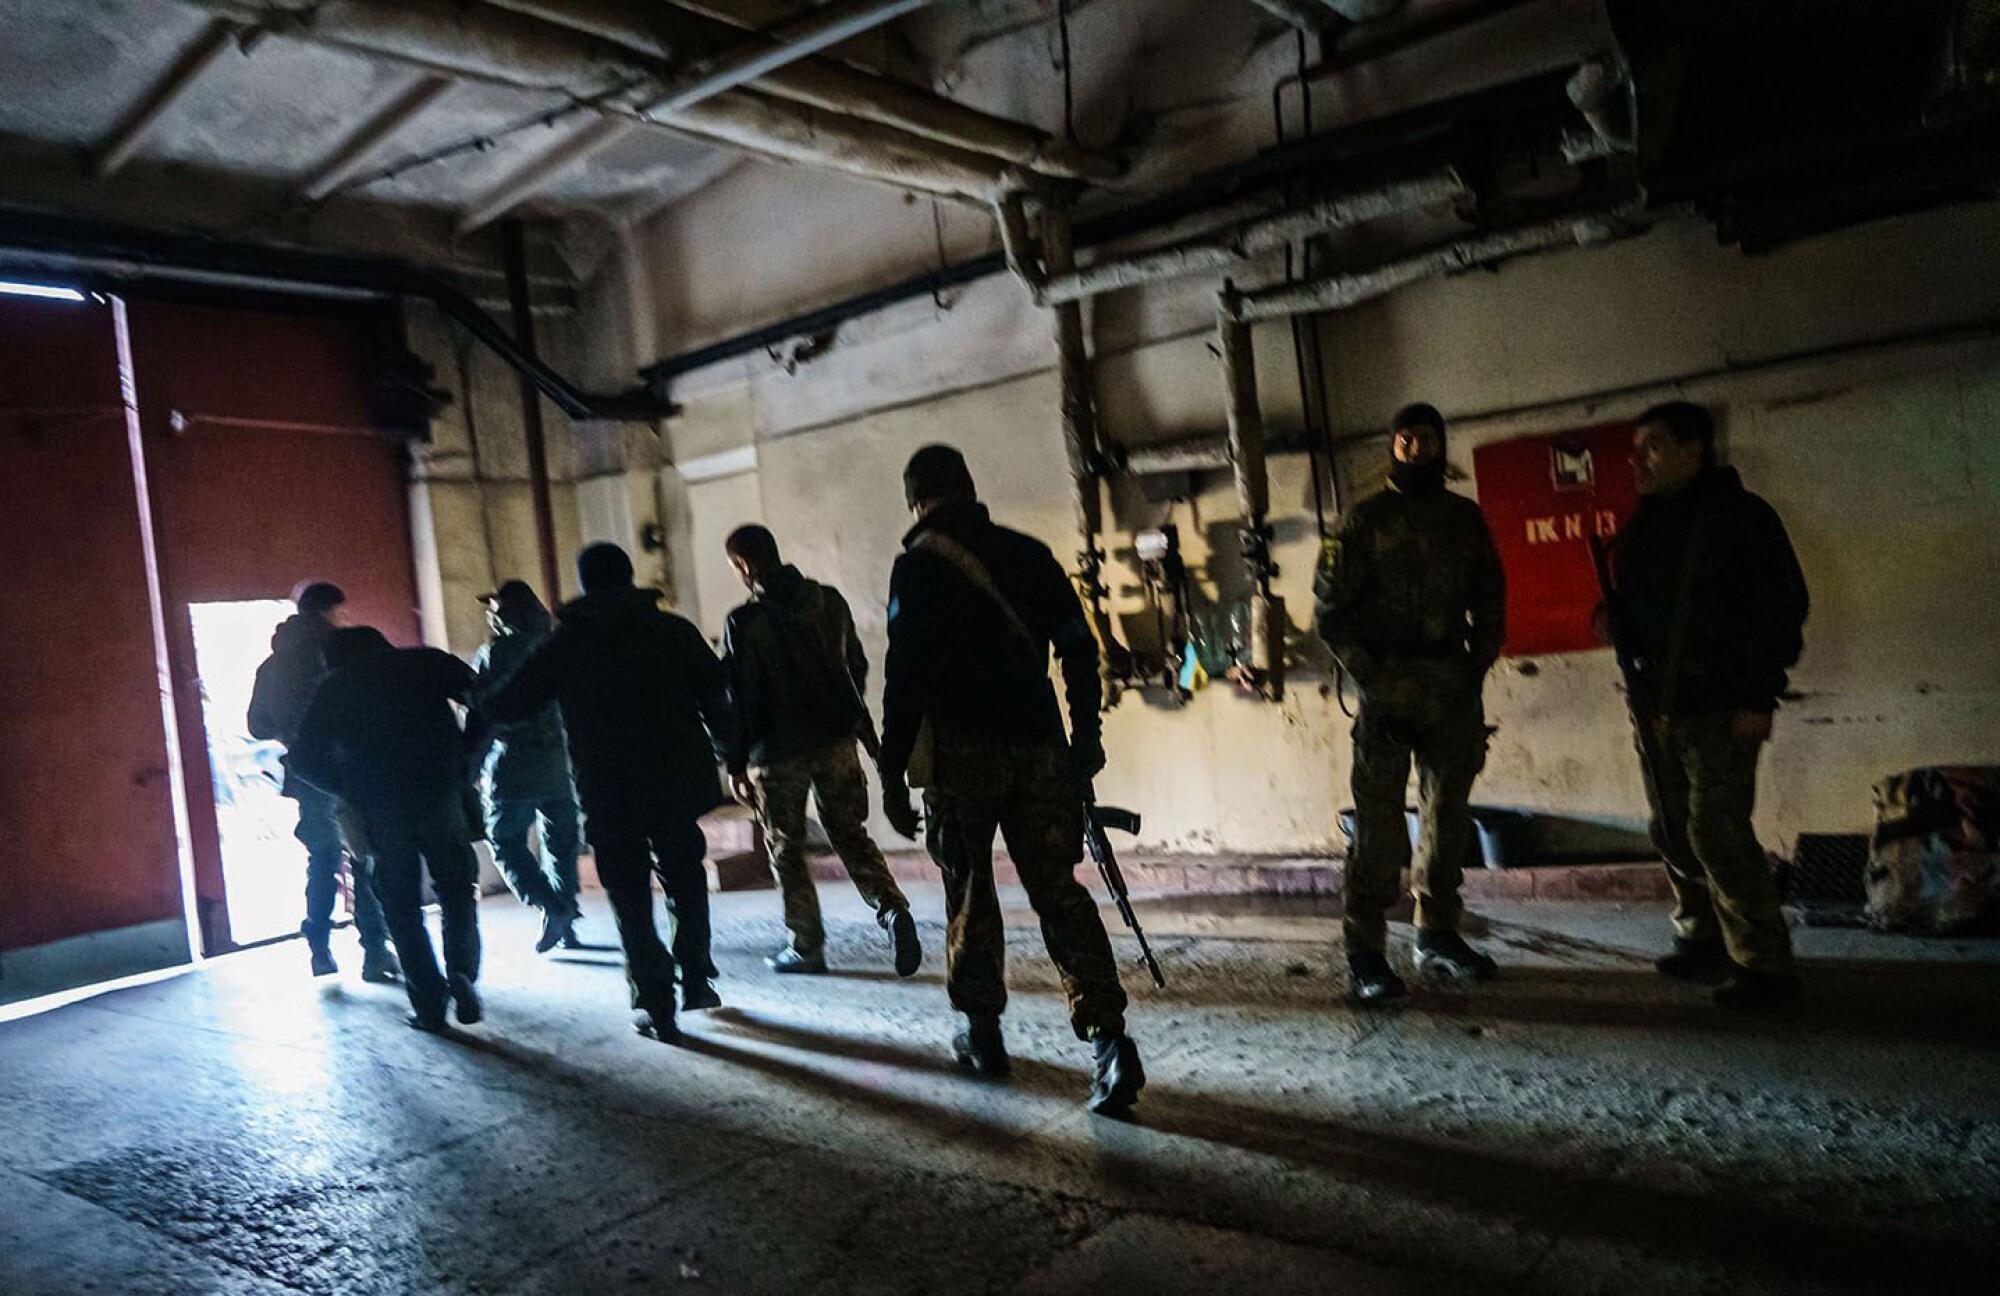 A group of armed people walk toward the open door of a building.